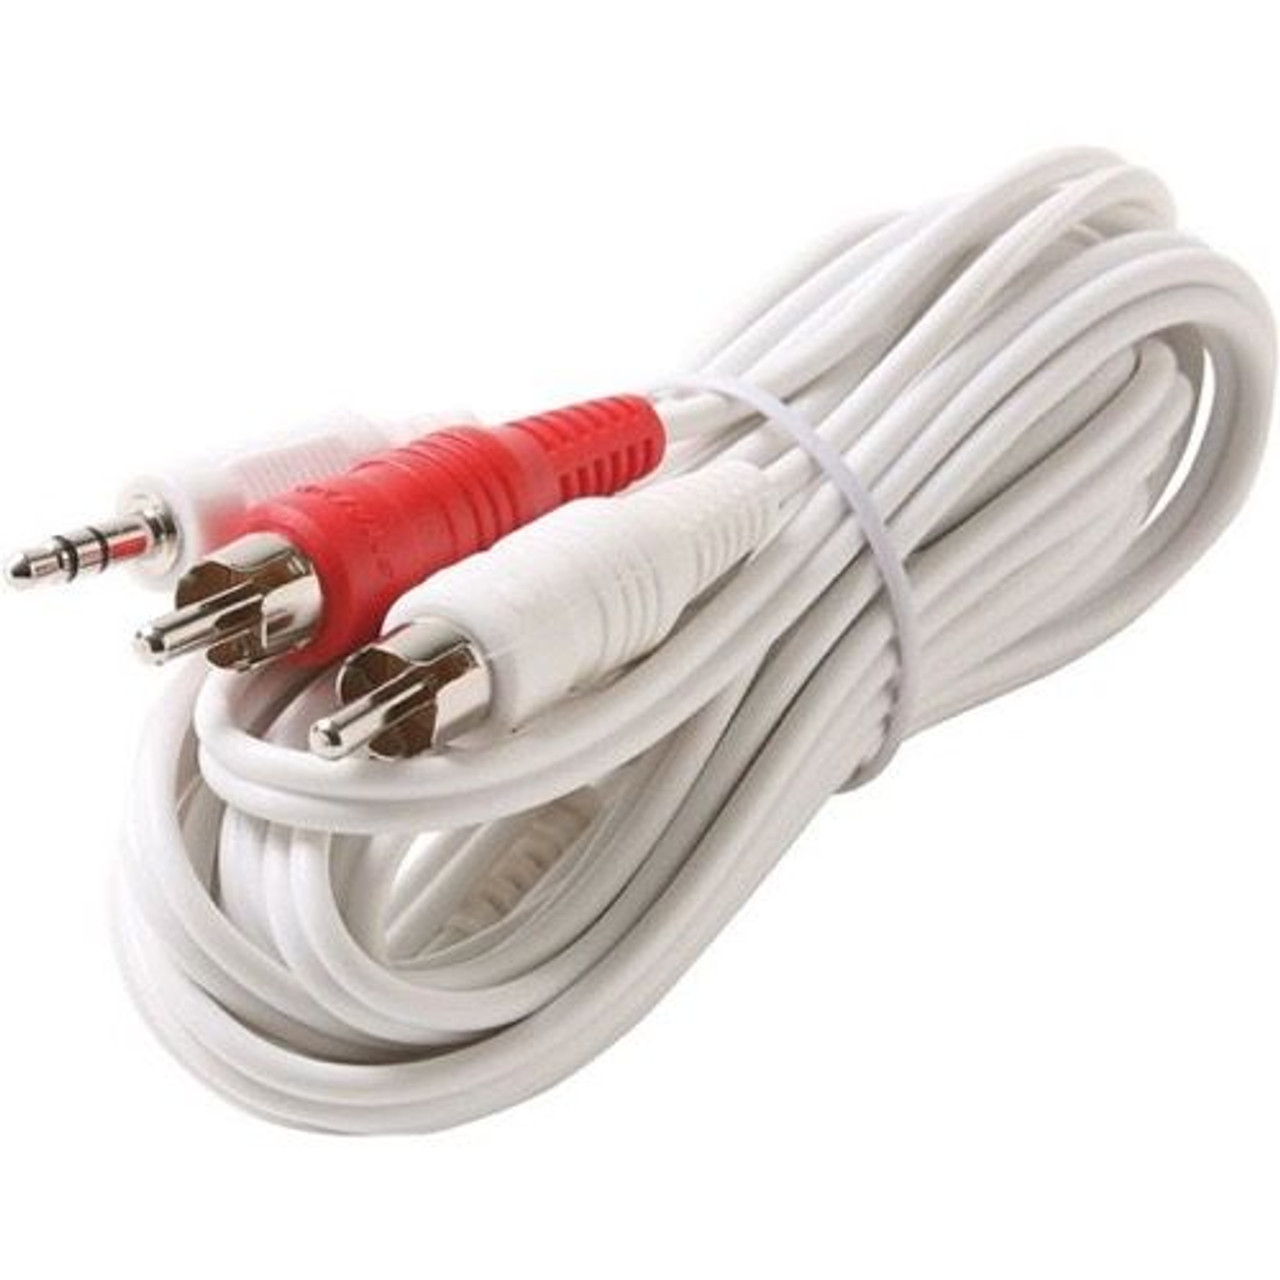 Steren 252-062WH 12' FT 3.5mm Male to 2 RCA Male Y Cable White iPod Stereo 3.5mm Male to Dual RCA Male Adapter Plug Shielded Audio Splitter Cable Signal Separating Component